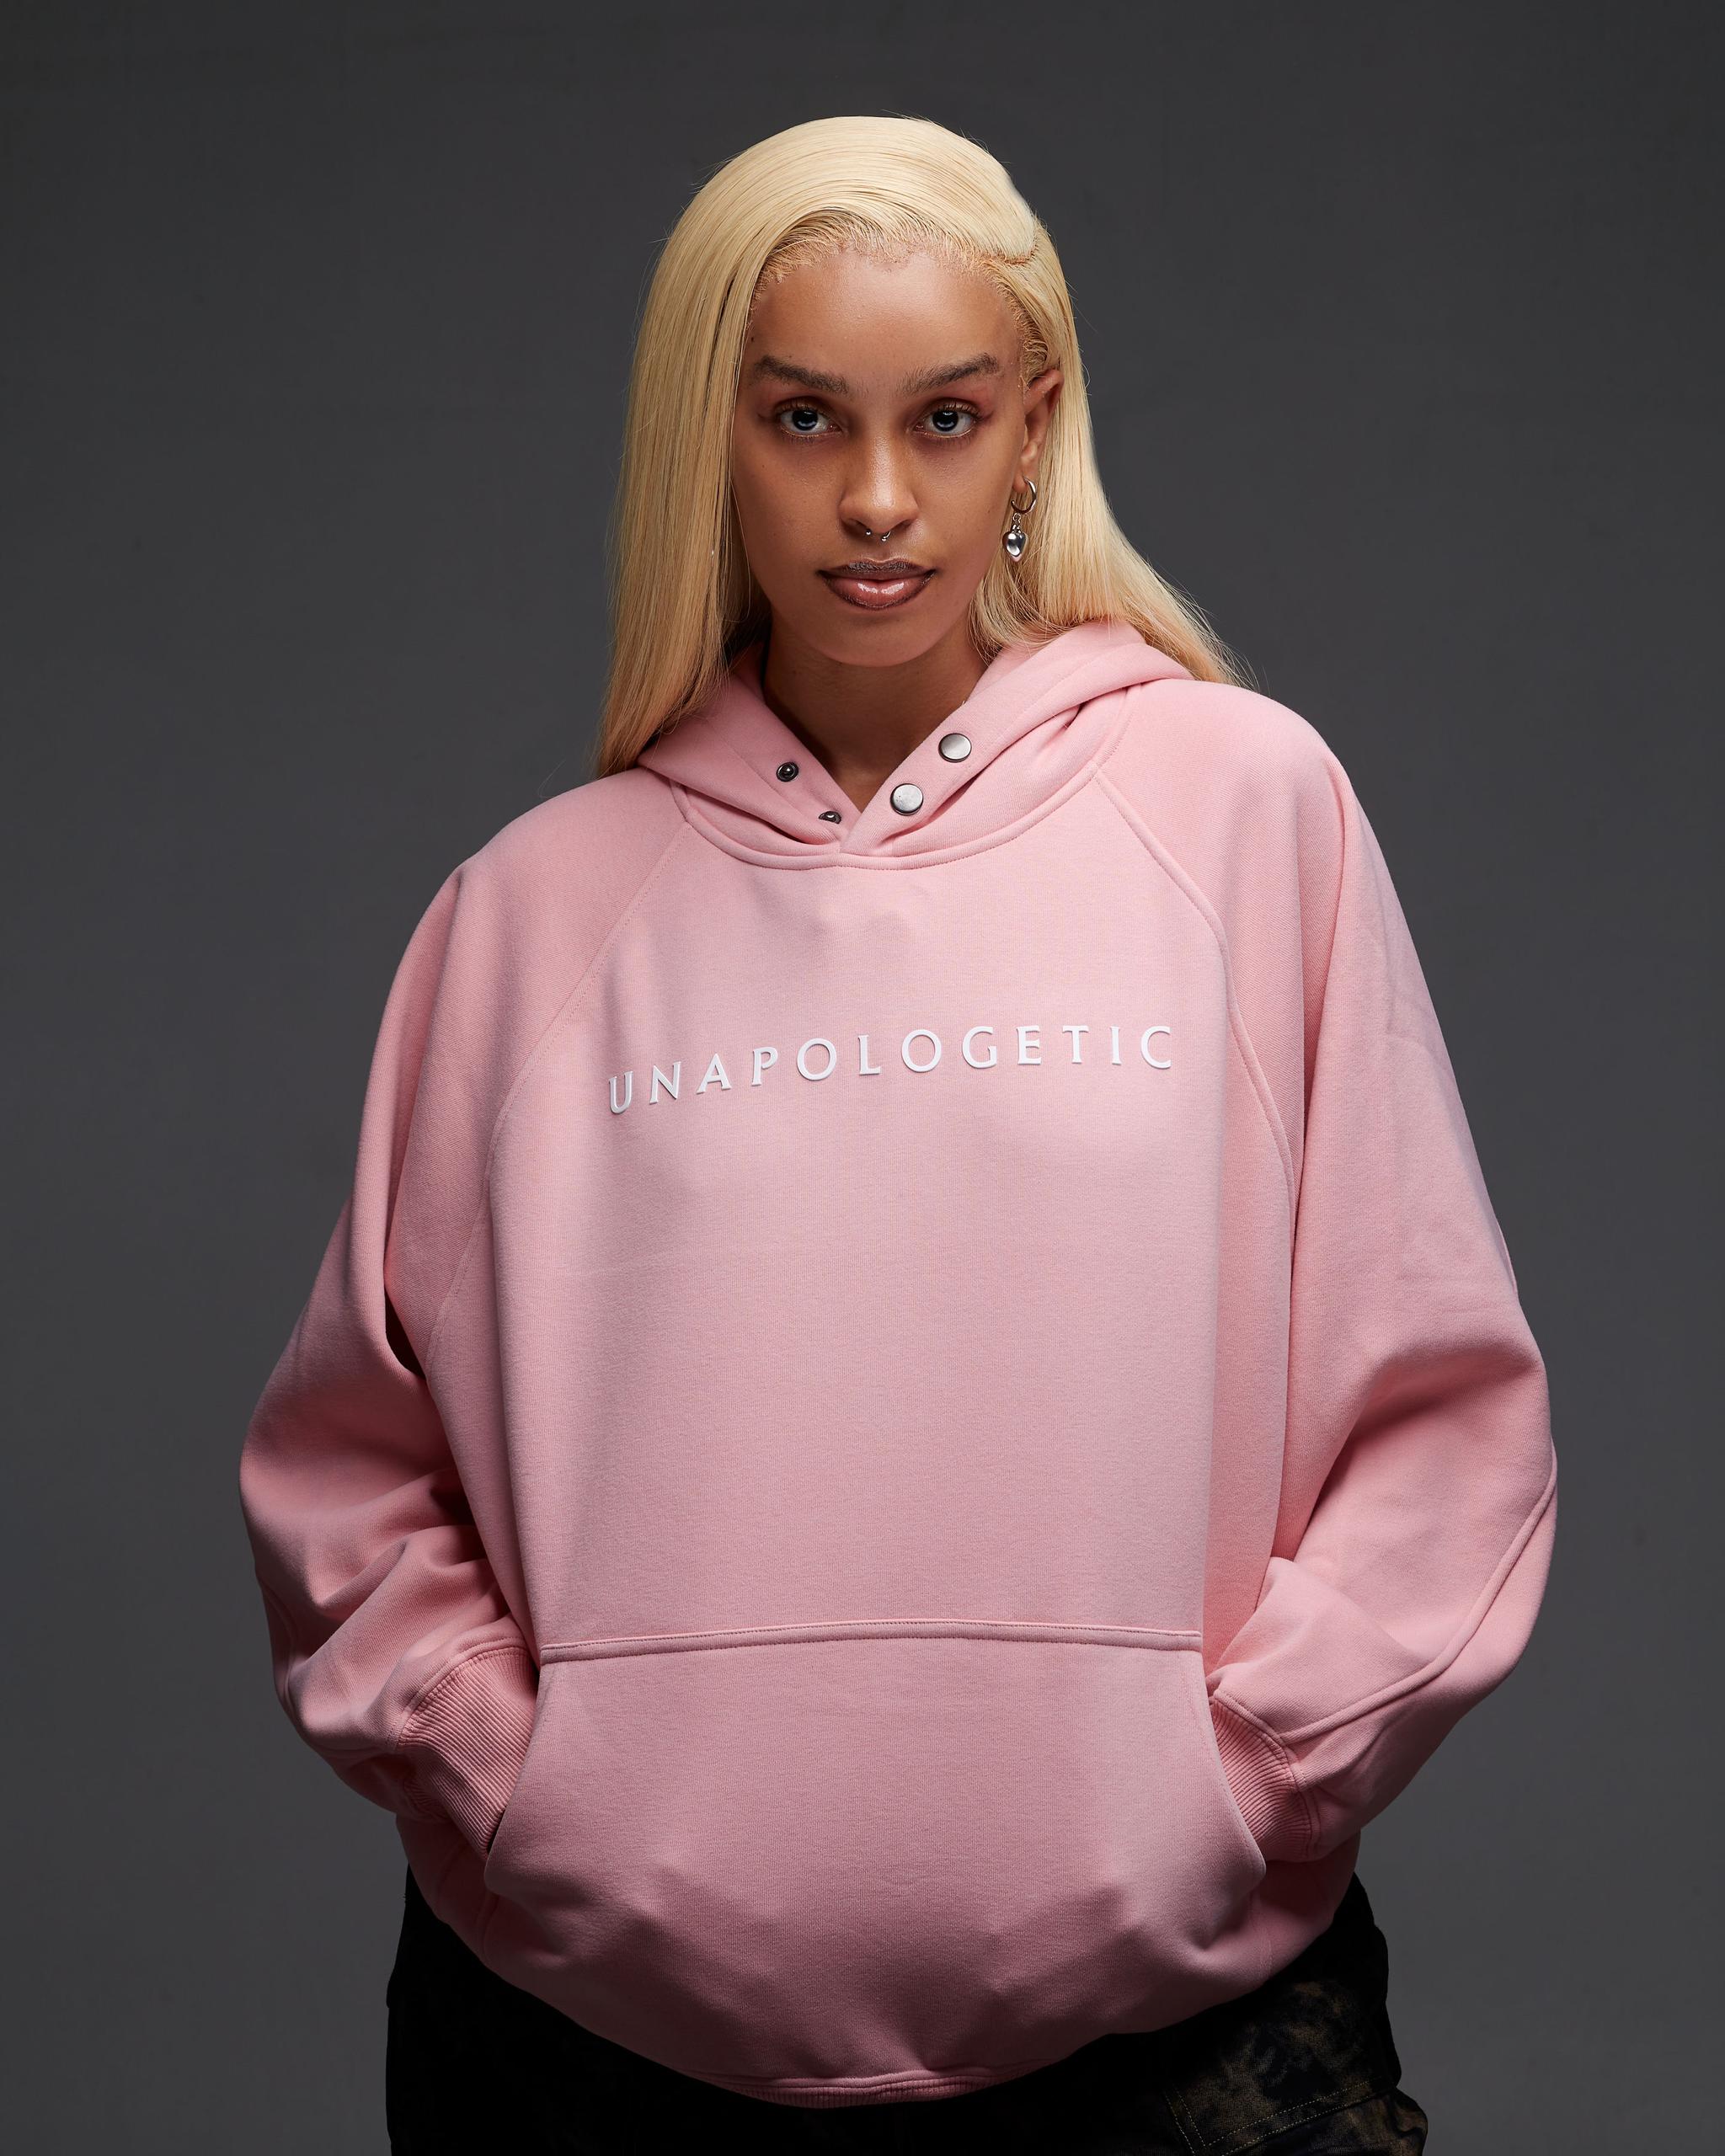 Unapologetic Hoody pink